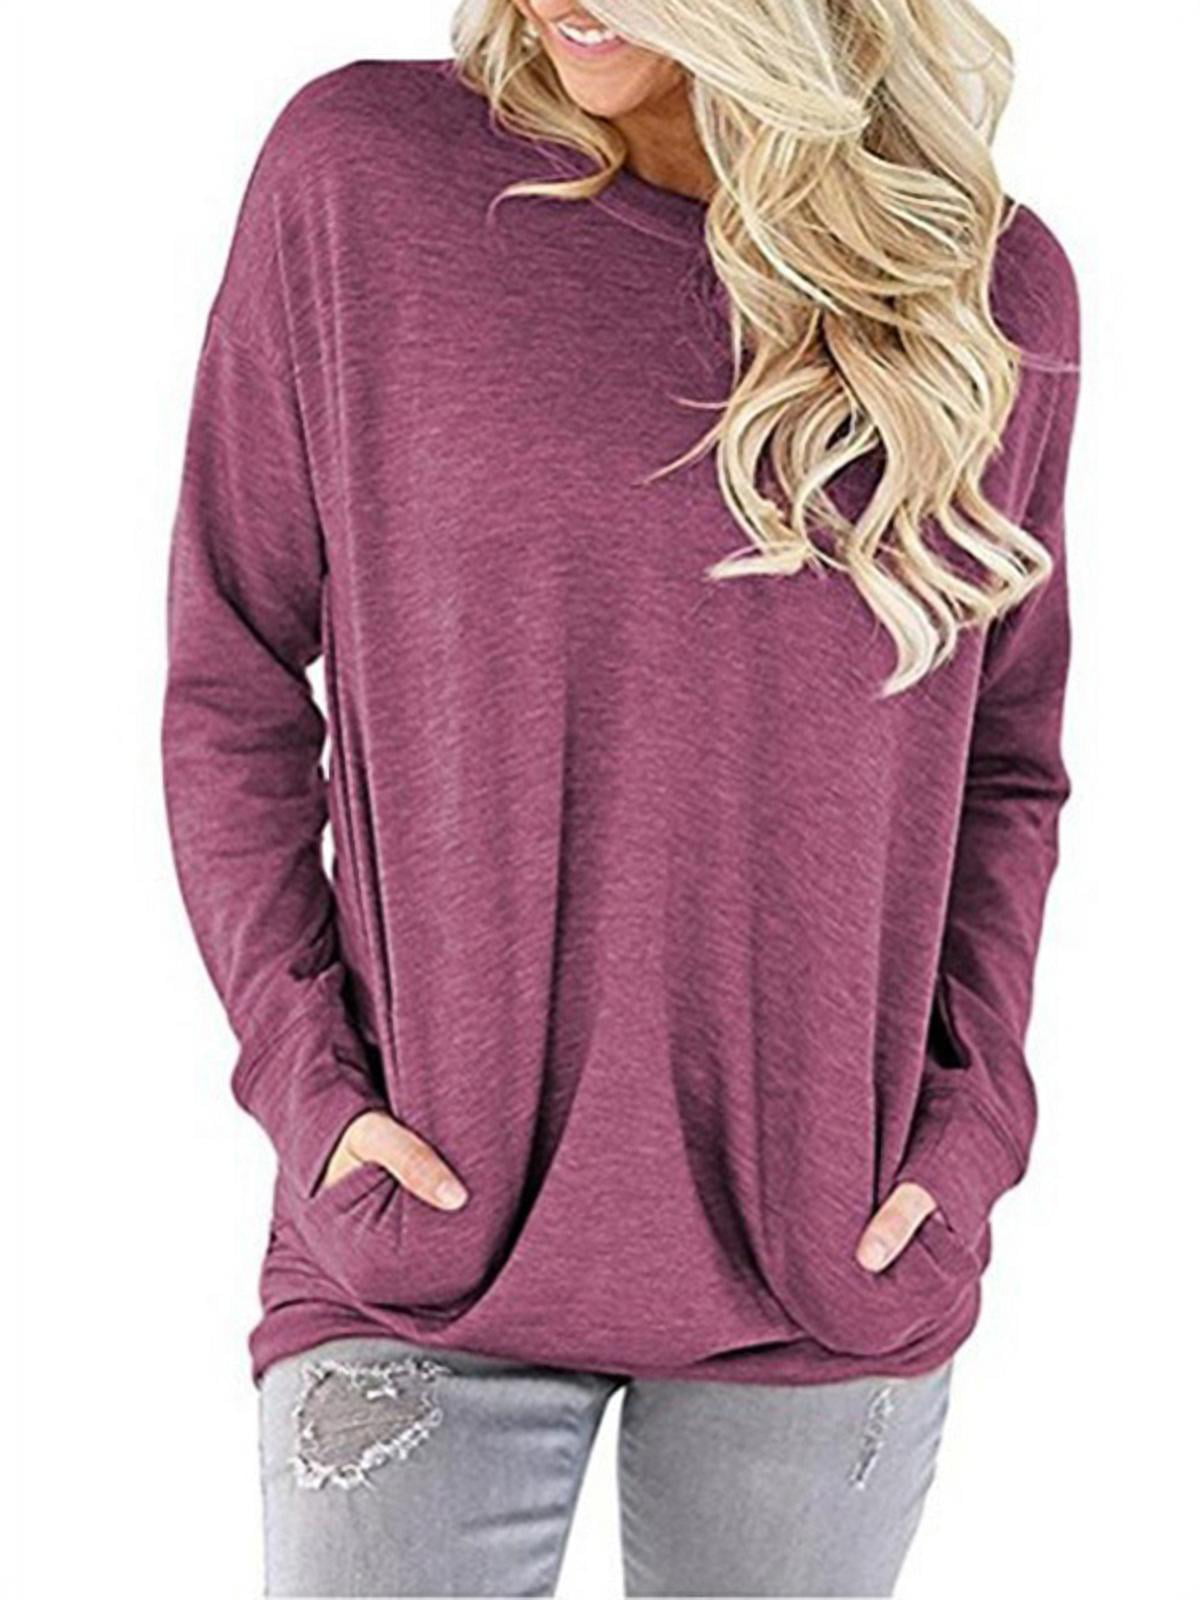 Hoodies for Women FAPIZI Women Casual V Neck Long Sleeve Button Solid Color Sweatshirts Pullover Tunic Top with Pocket 